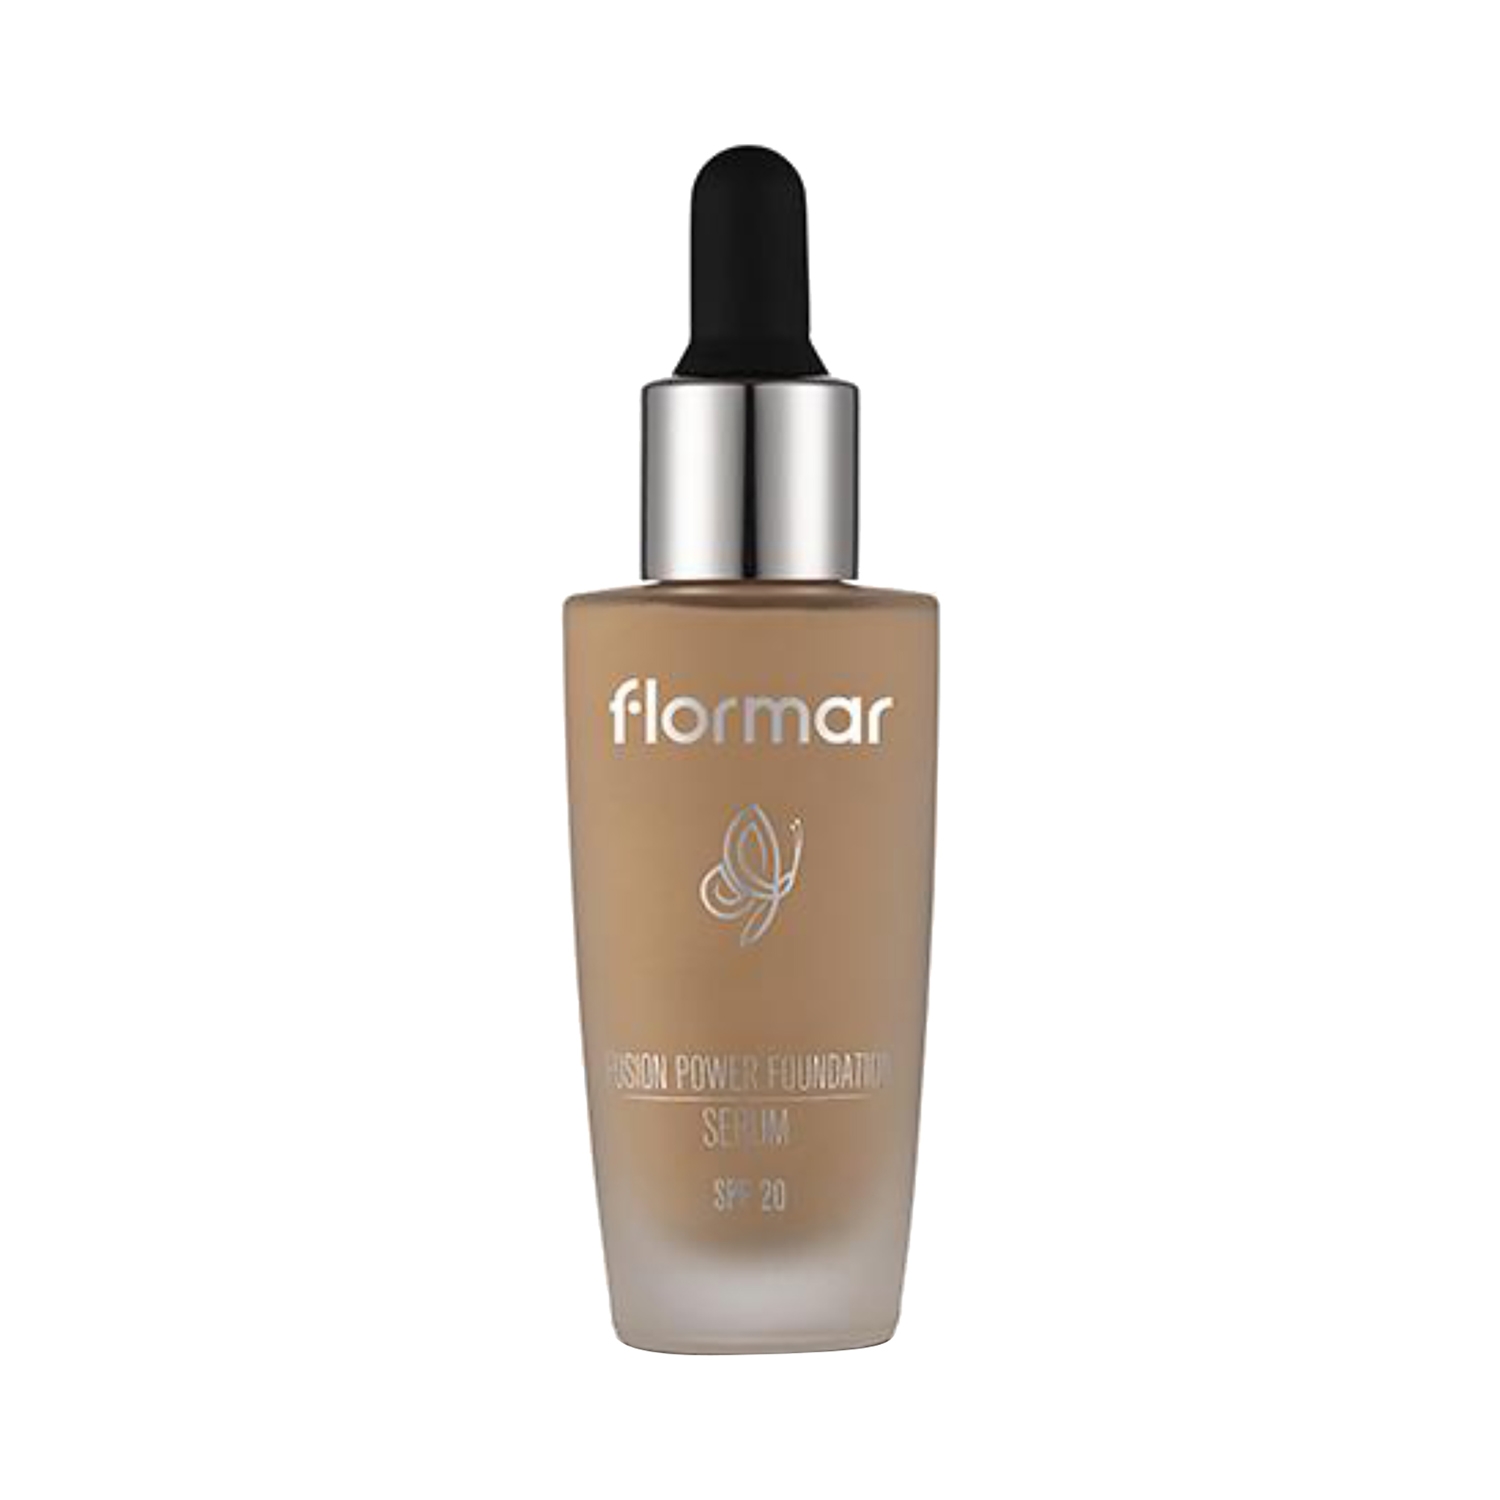 Flormar HD Invisible Cover Foundation Long-lasting 30 ml Different Shades